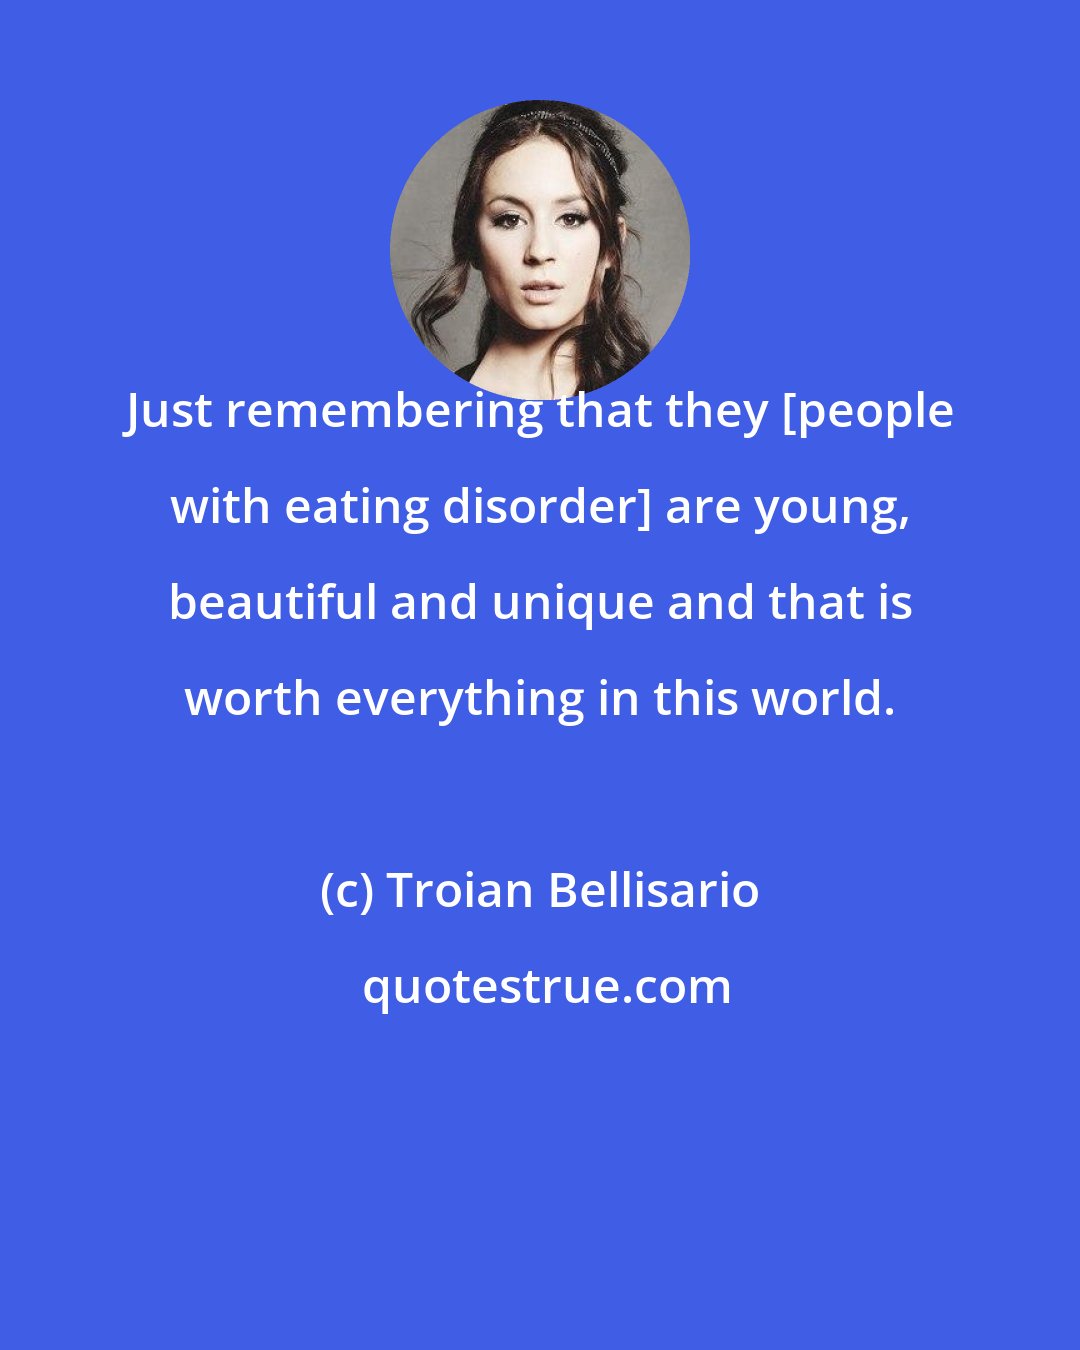 Troian Bellisario: Just remembering that they [people with eating disorder] are young, beautiful and unique and that is worth everything in this world.